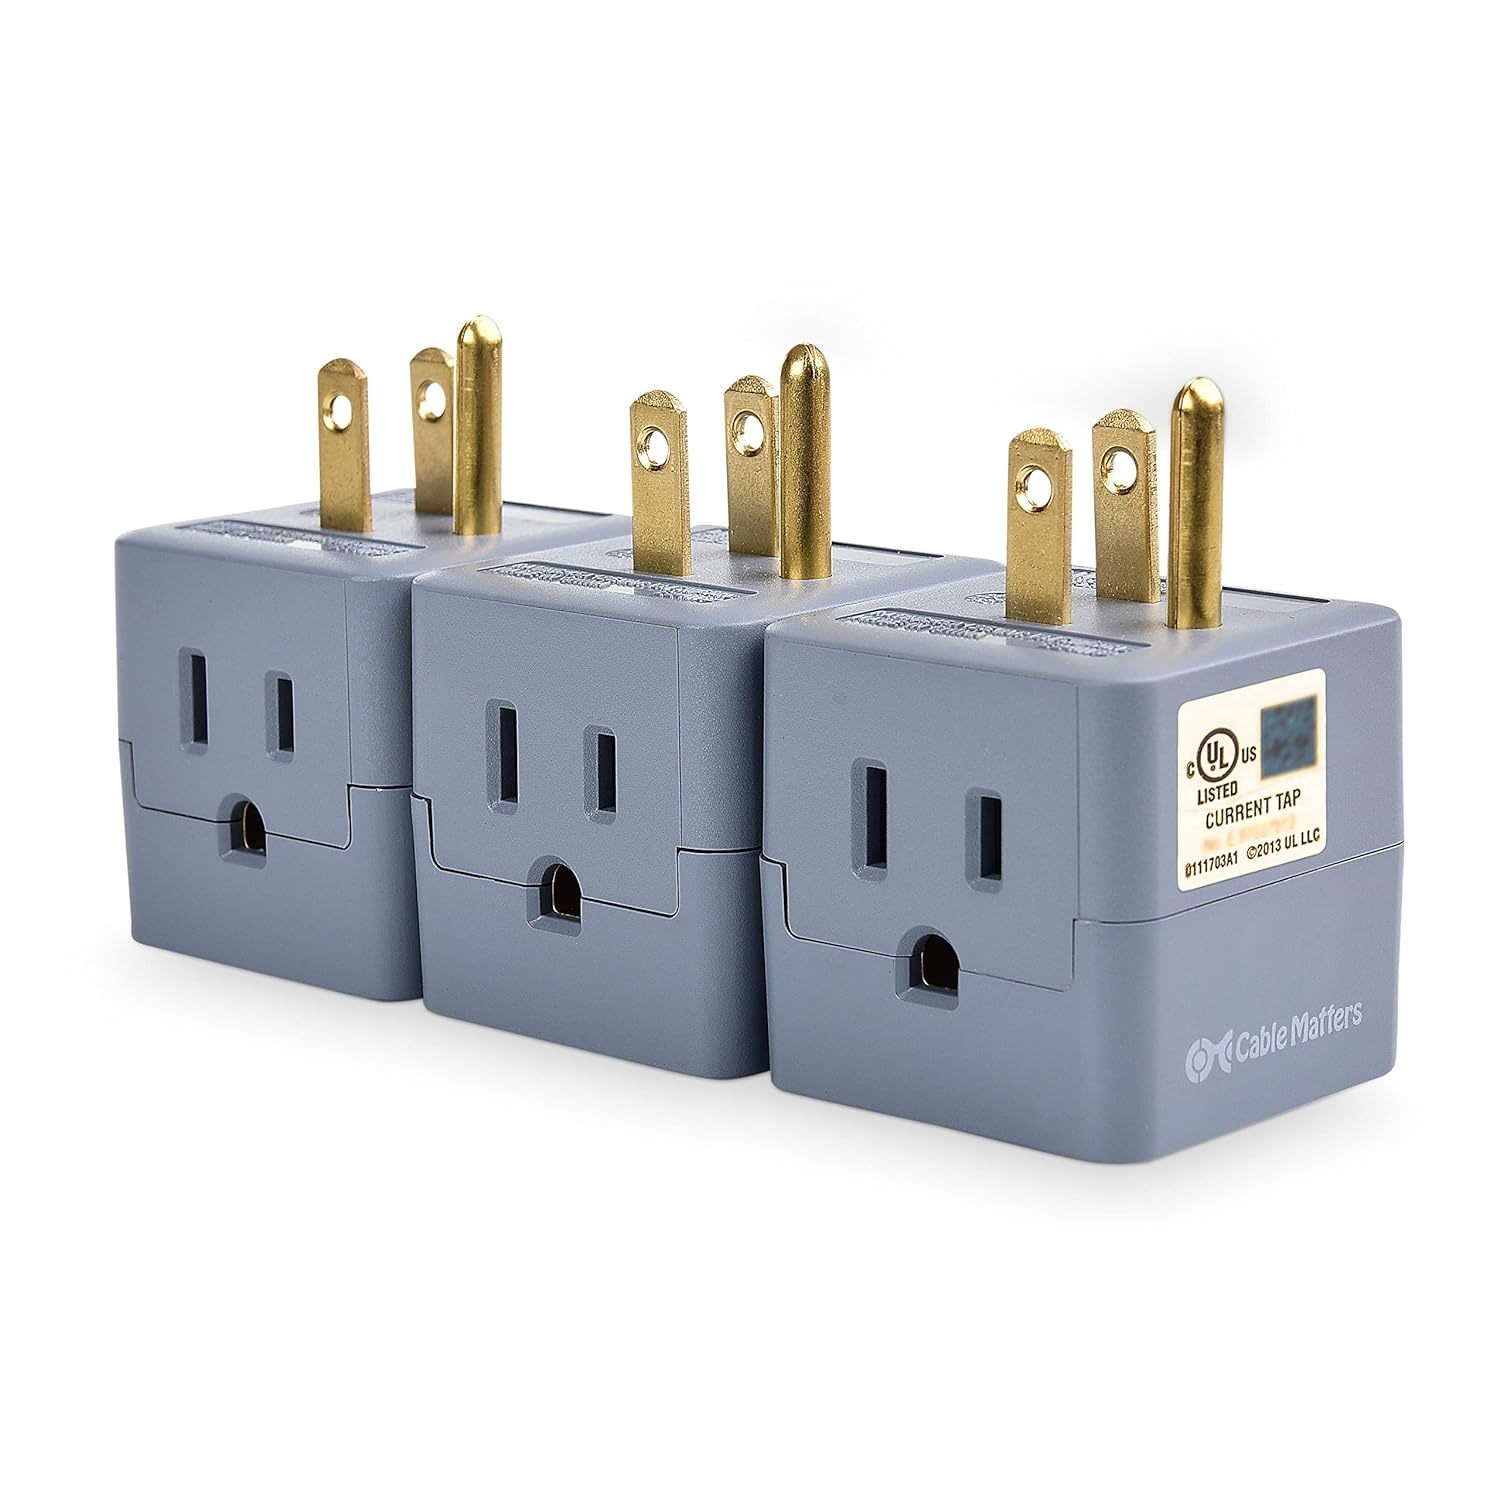 Primary image for [UL Listed] Cable Matters 3-Pack 3 Outlet Wall Adapter, 3 Outlet Power Cube Tap,